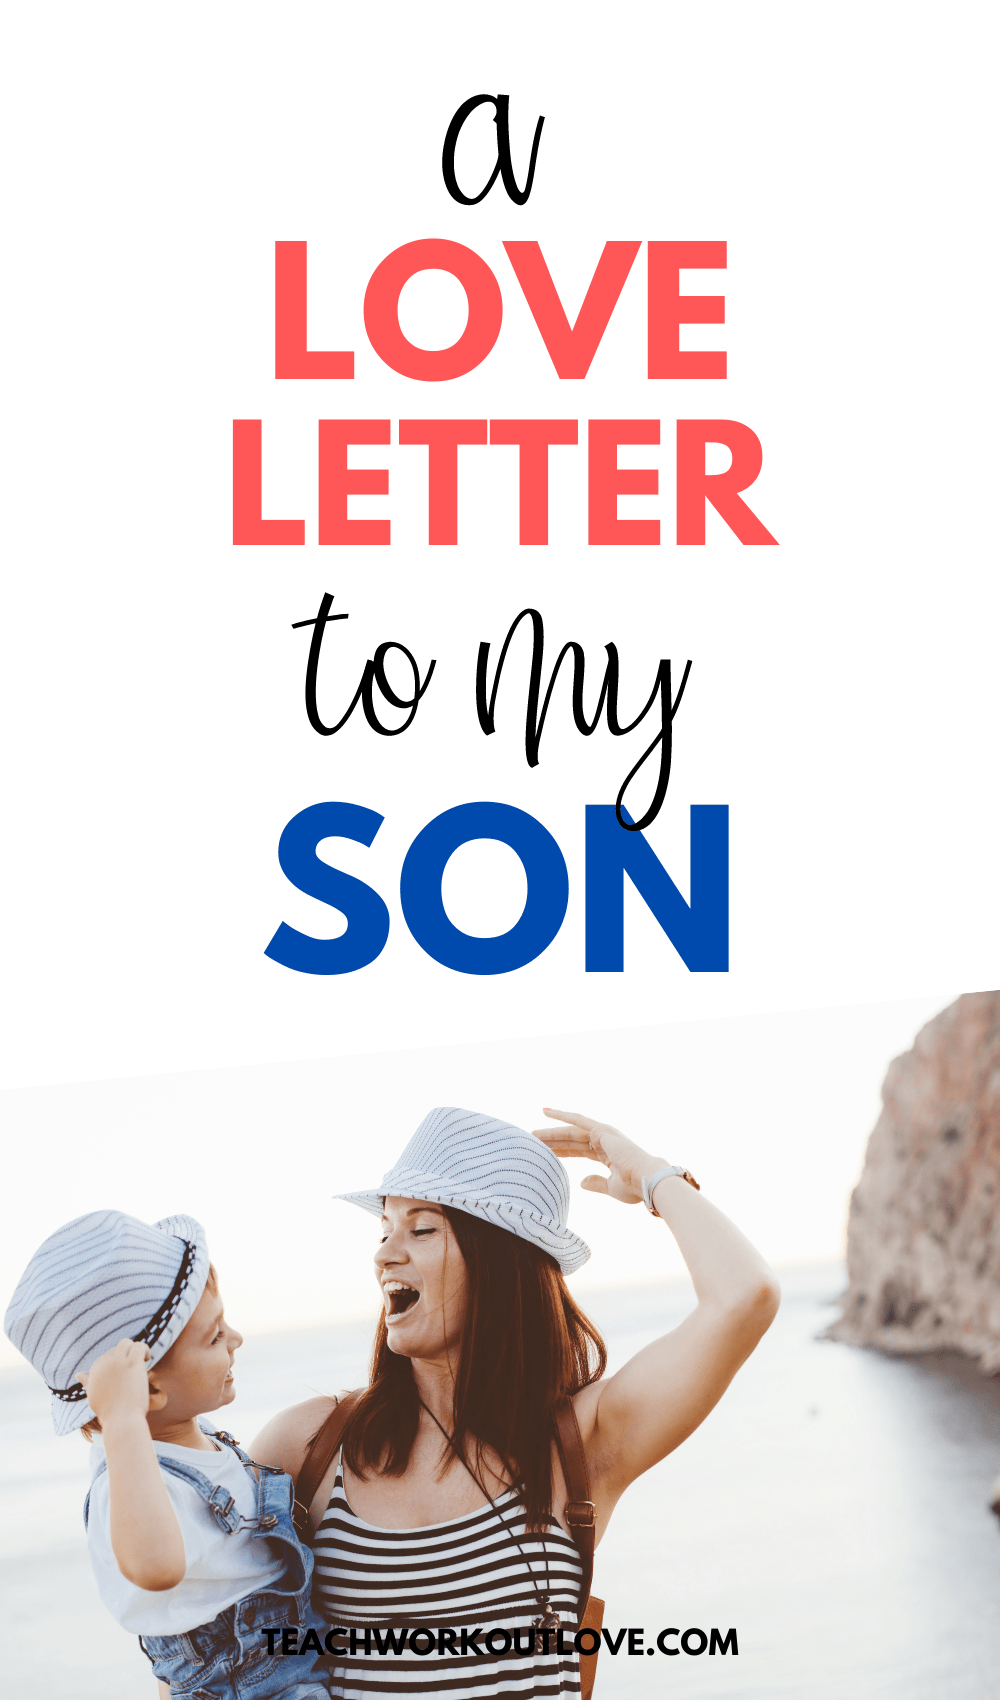 To The Little Boy Who Made Me A Mom - A Love Letter to my Son. A letter from a mother to her son, sharing the detailed love for her son.